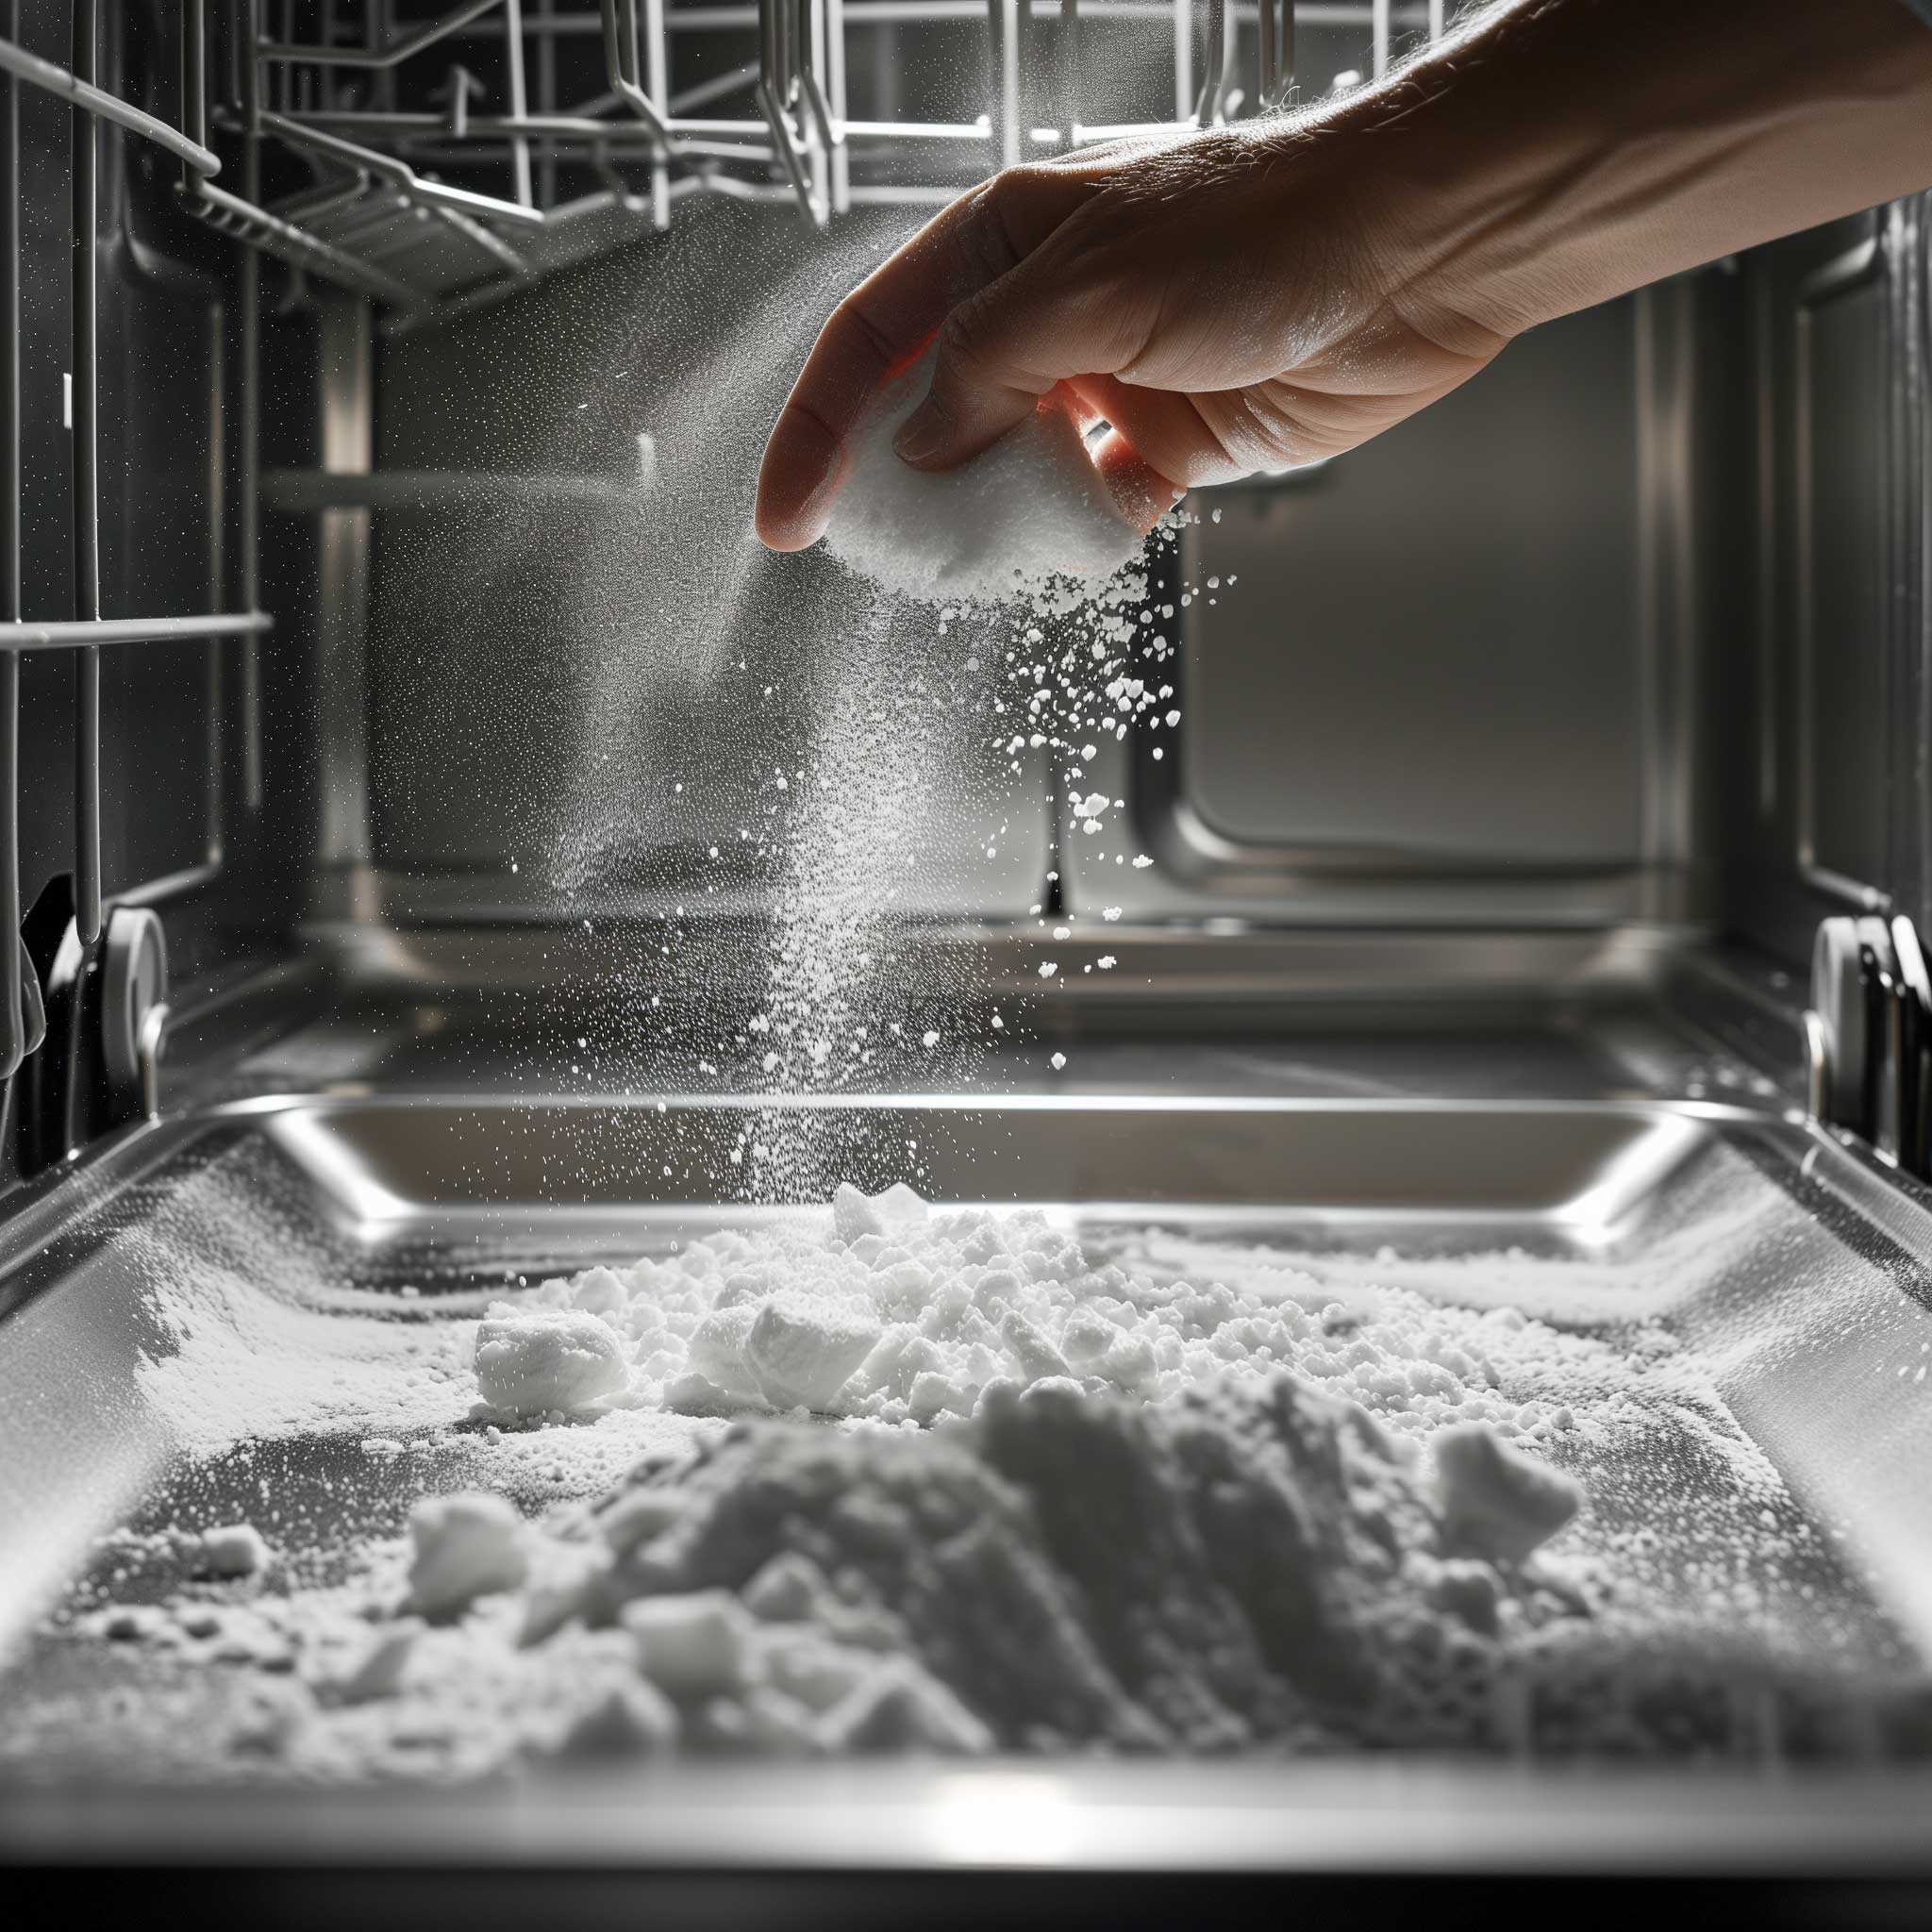 Clean Your Dishwasher Naturally